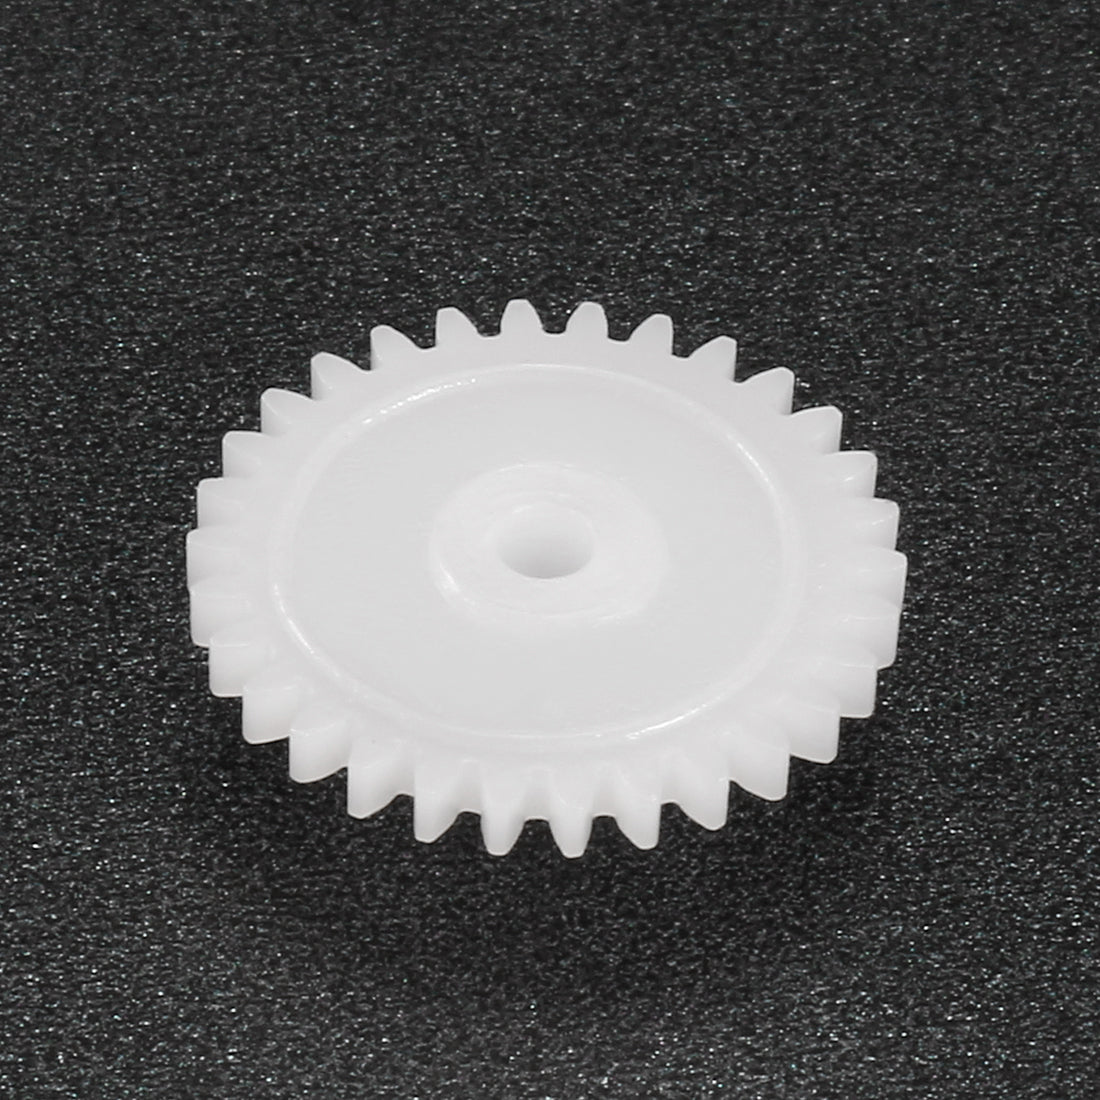 uxcell Uxcell 20Pcs 30102B Plastic Gear Accessories with 30 Teeth for DIY Car Robot Motor